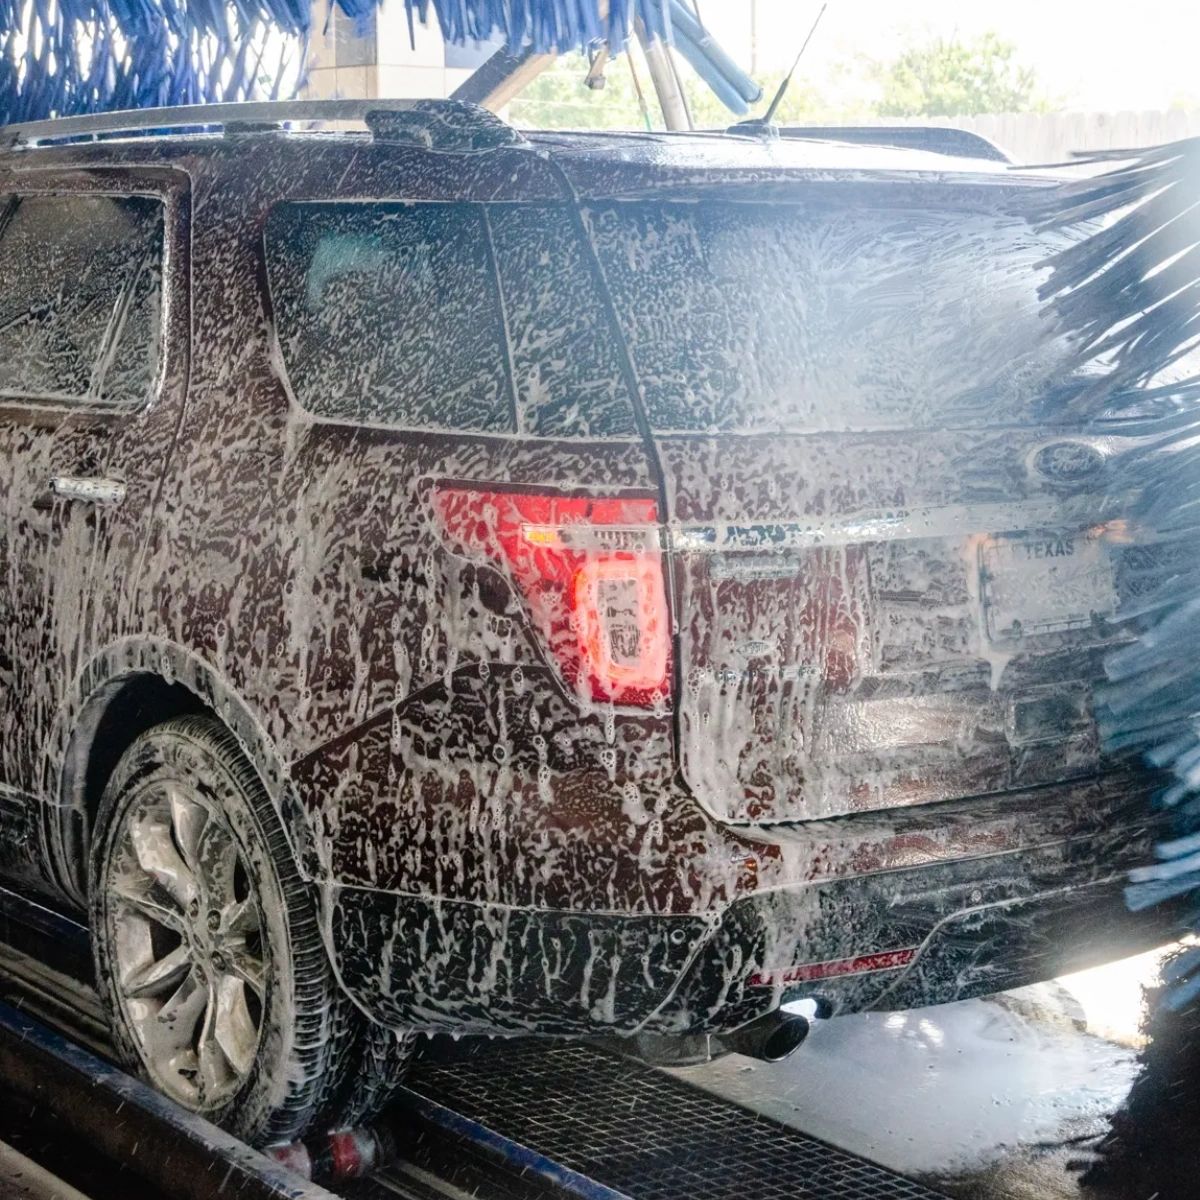 Did you know that washing your car by hand can take one to three hours to complete? Save yourself time and energy by letting our automatic car wash do the work for you! #SpeediCarWash #CarWash #Spanaway #CleanCar #vacuum